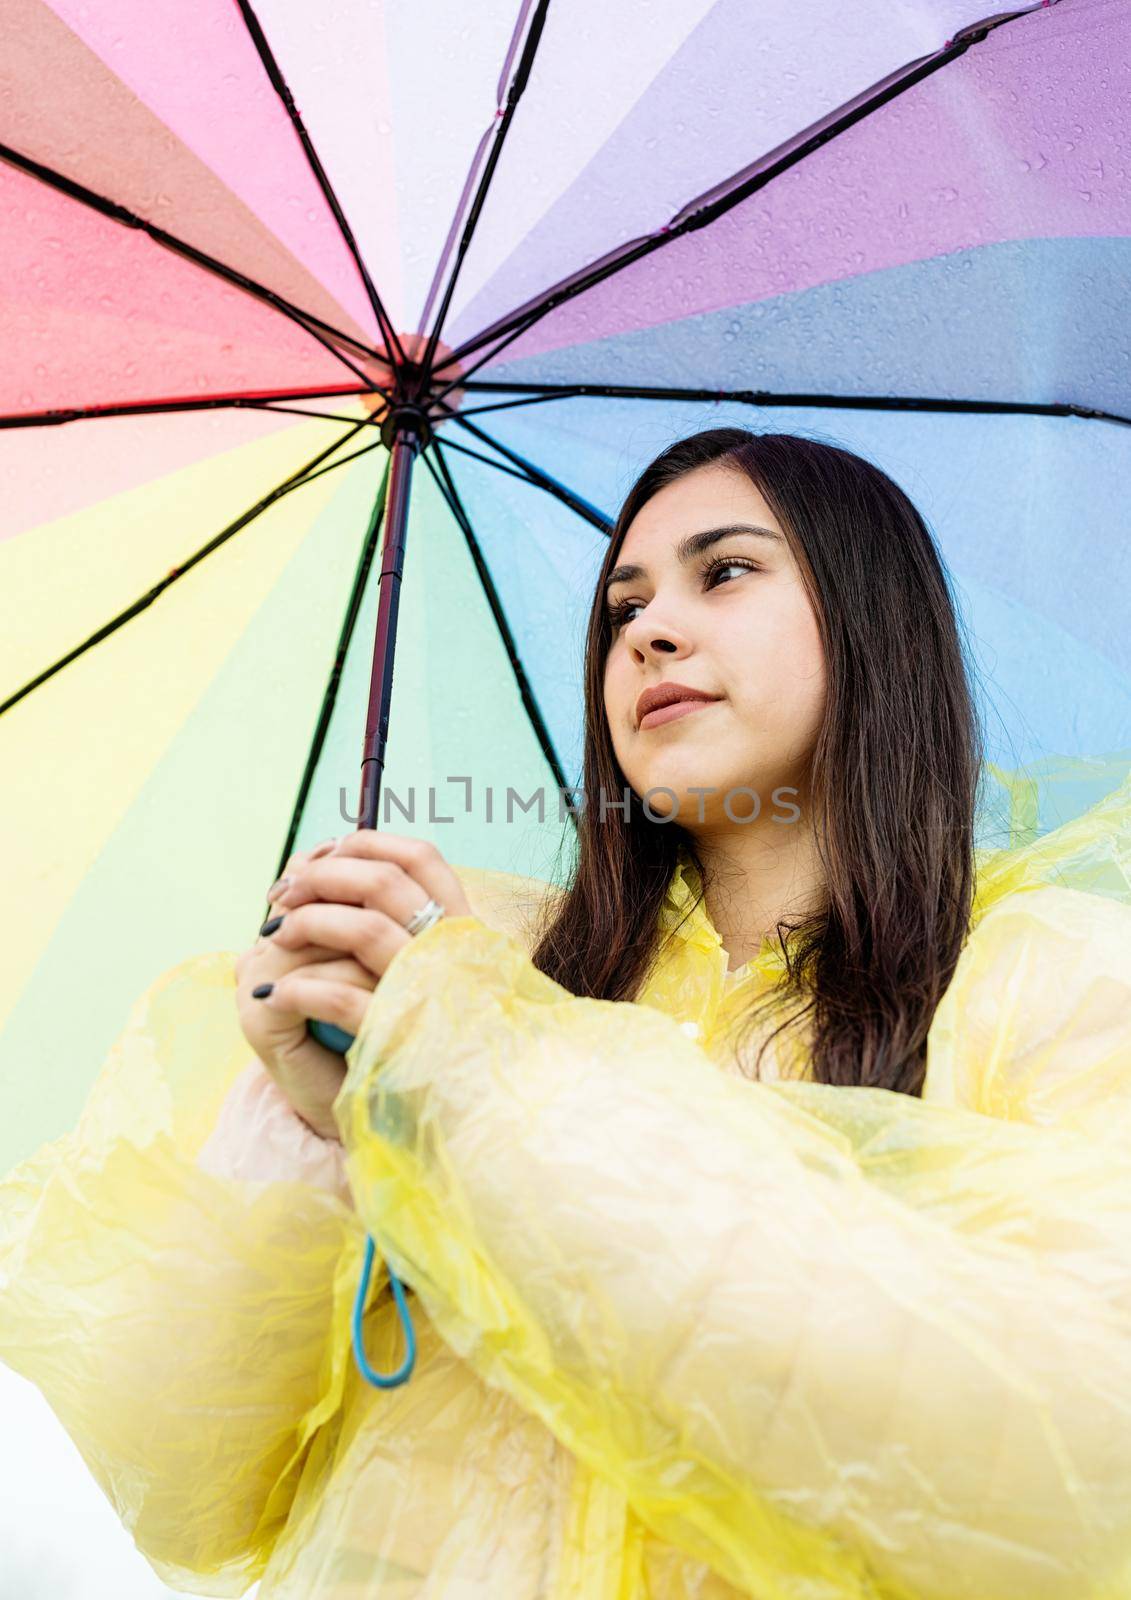 Beautiful smiling brunette woman in yellow raincoat holding rainbow umbrella out in the rain